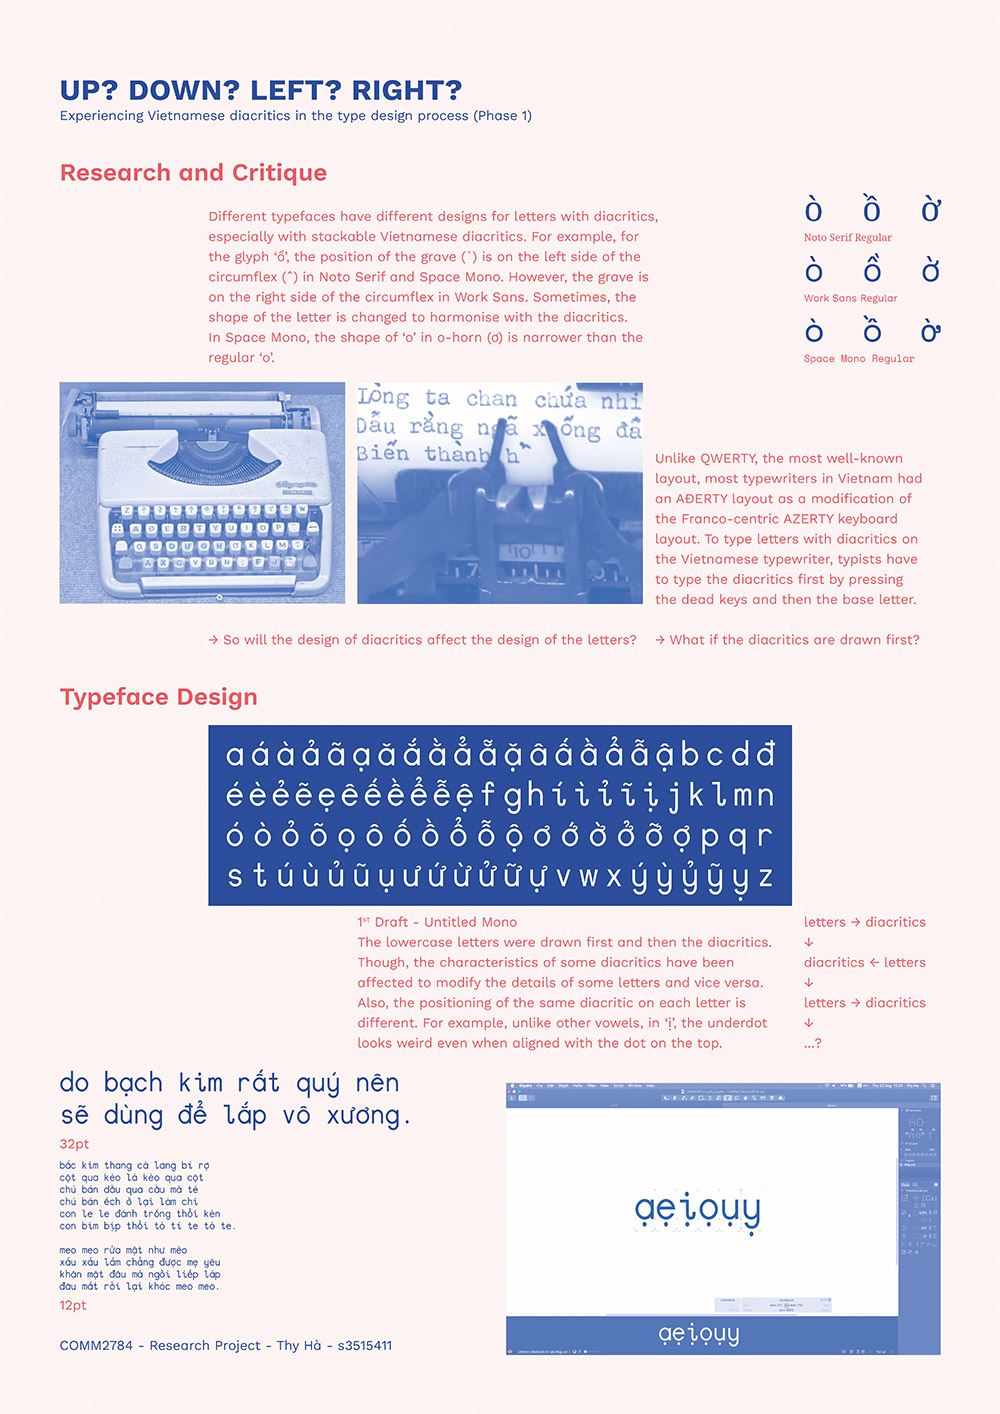 The purpose of the Phase 1 was to look into the literature and analyse practice precedents as existing typefaces that already support Vietnamese. Also, the monospaced font was started to design from here. While looking at the typewriter resources, the interesting fact was in order to type letters with diacritics on the Vietnamese typewriter, typists have to type the diacritics first by pressing the dead keys and then the base letter.